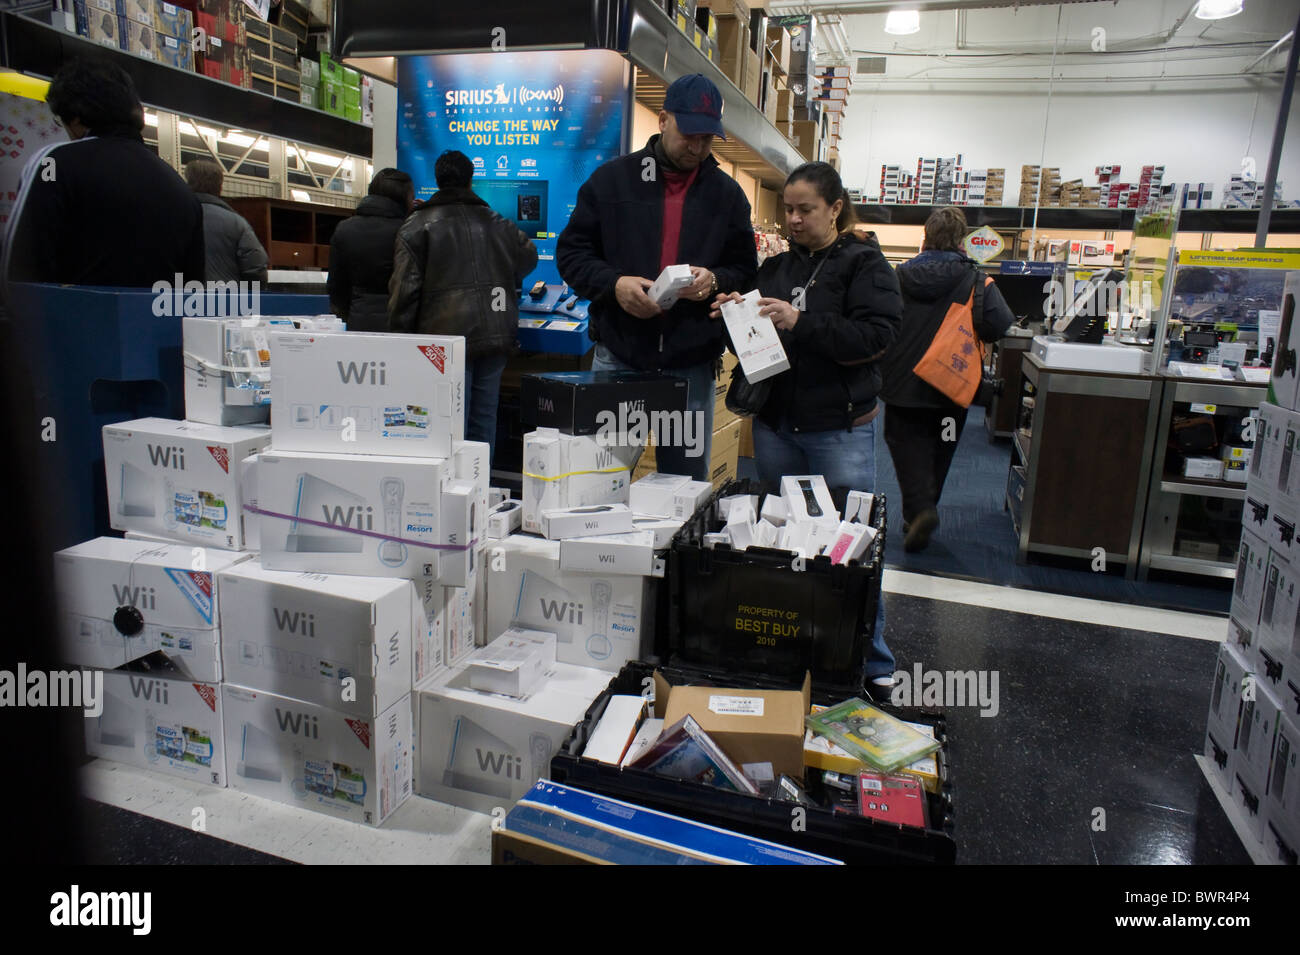 Shoppers inspect boxes of Nintendo Wii games in a Best Buy electronics  store in Elmhurst in the New York borough of Queens Stock Photo - Alamy